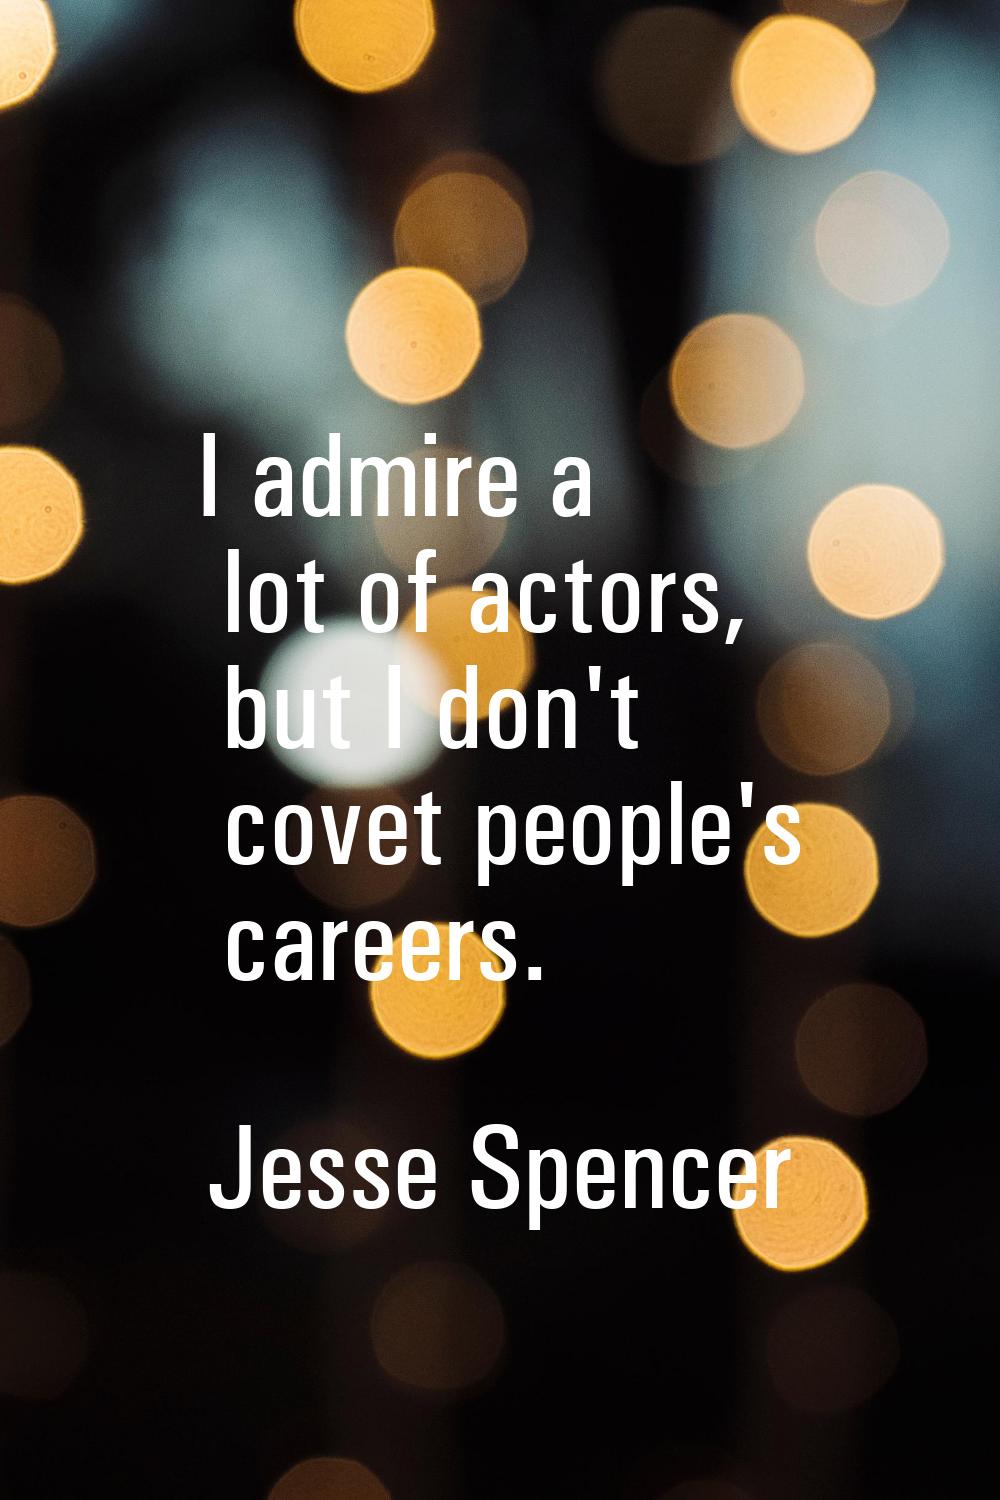 I admire a lot of actors, but I don't covet people's careers.